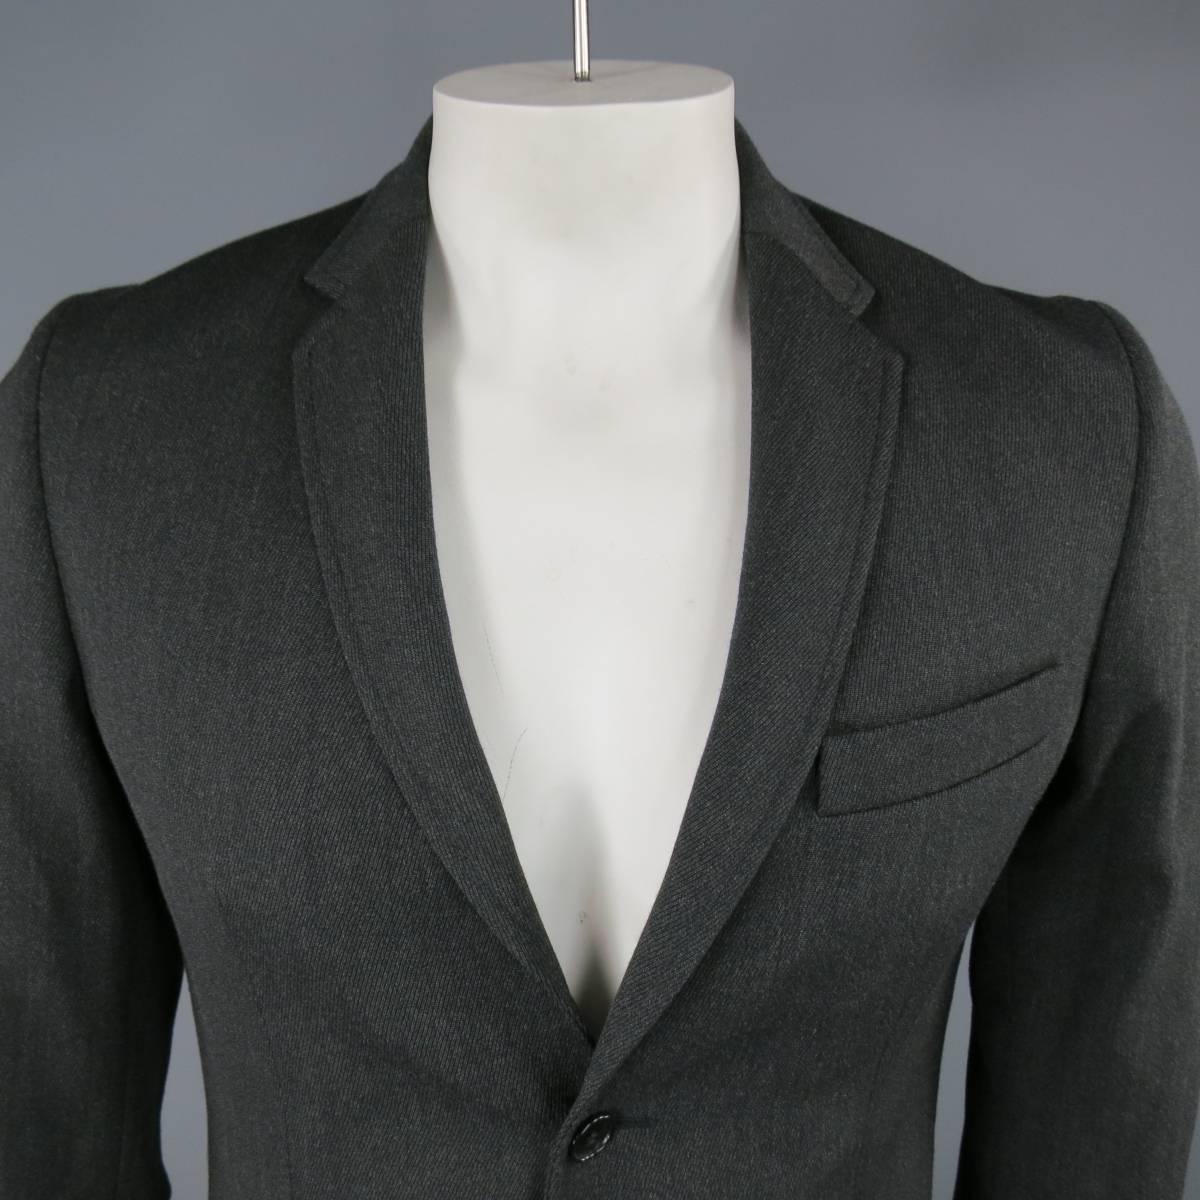 MAISON MARTIN MARGIELA Sport Coat consists of 100% wool material in a charcoal color tone. Designed with a notch lapel collar, 3-button front, bottom flap pockets and top pocket square. 4-button cuffs, single back vent with full construction lining.